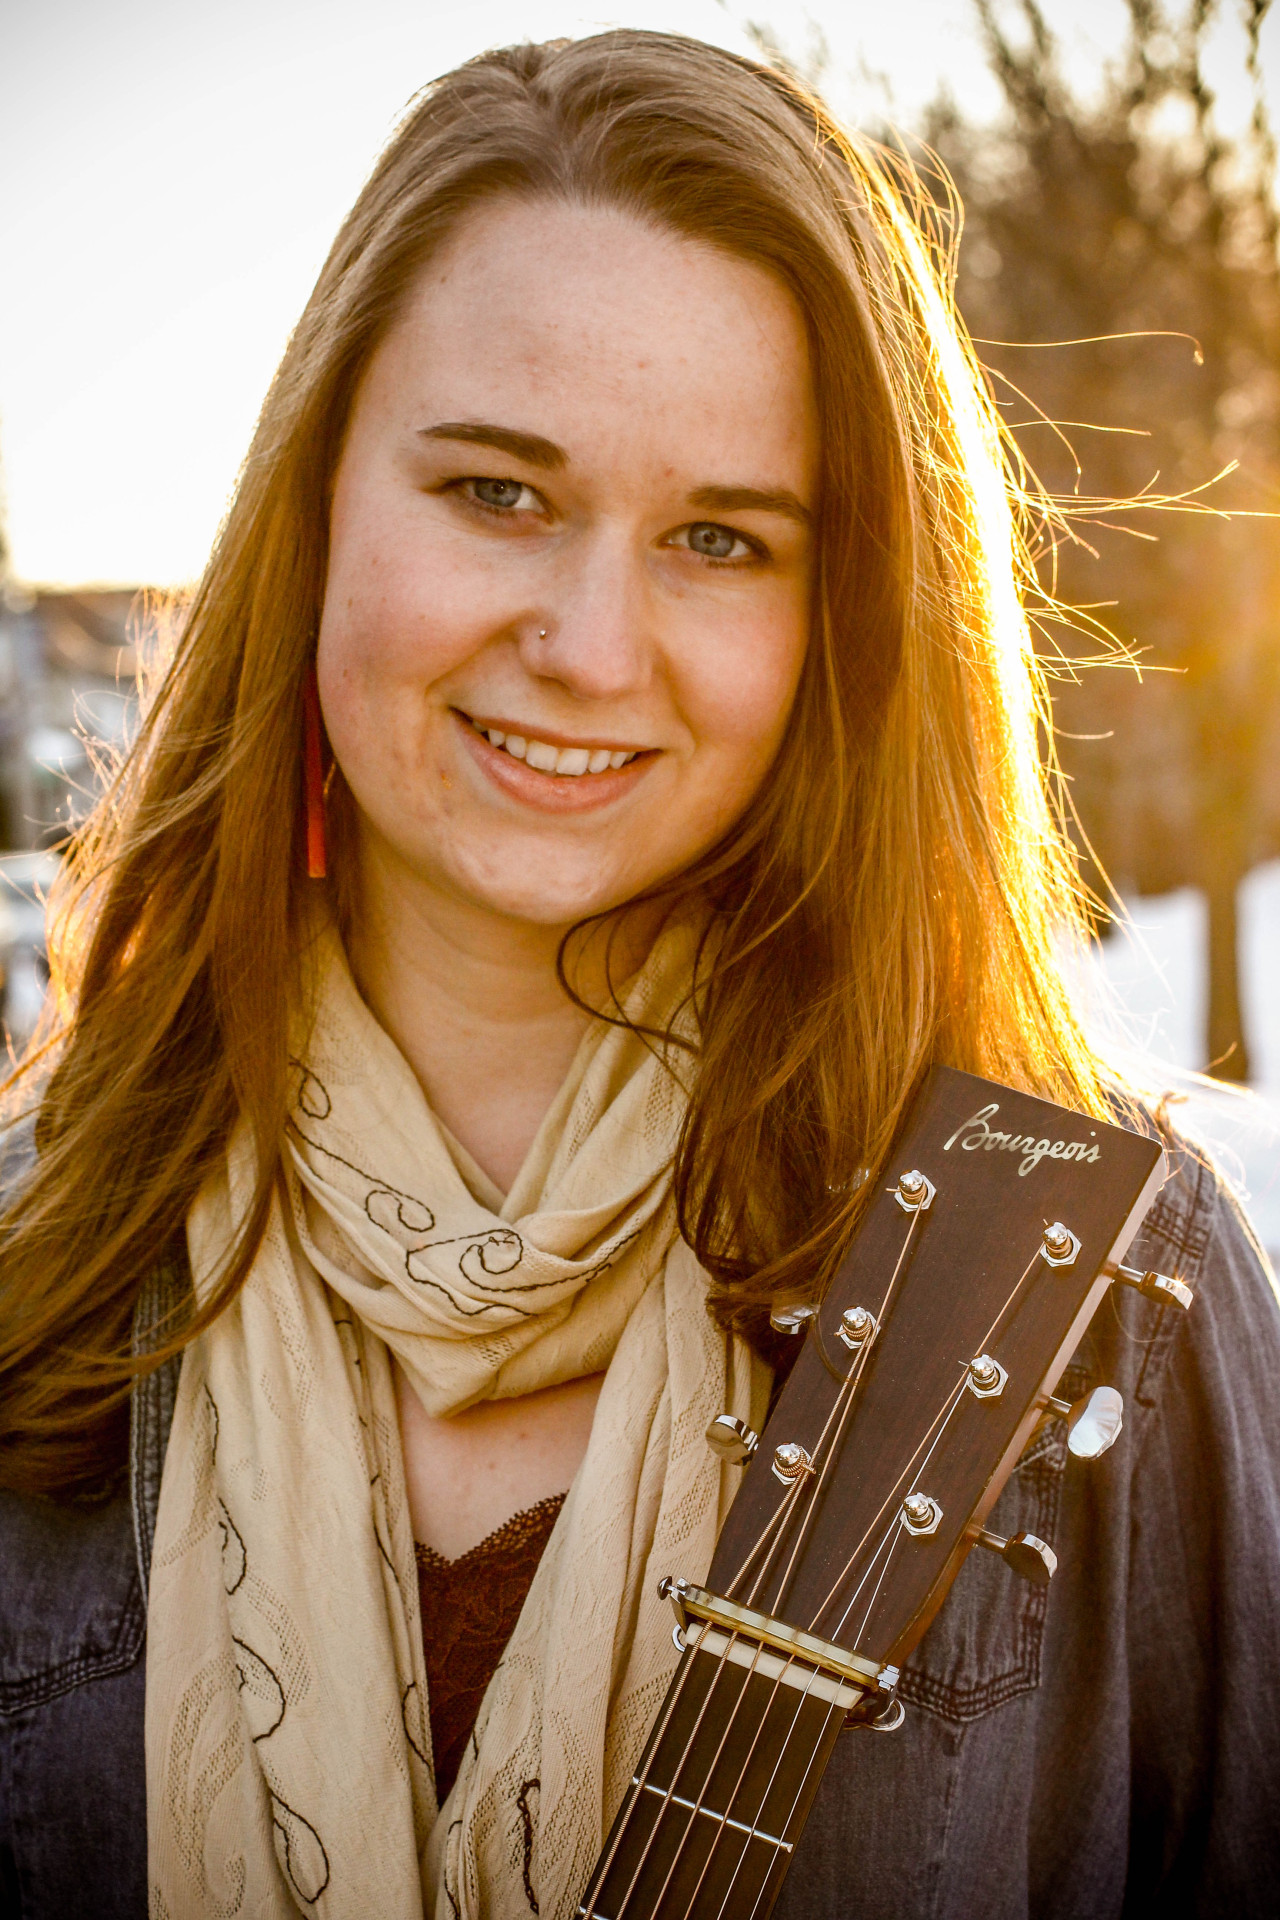 ... Photos of guitarist, Courtney Hartman, who plays in the bluegrass band, Della Mae - tumblr_miwatpxL271rrs9i7o4_1280